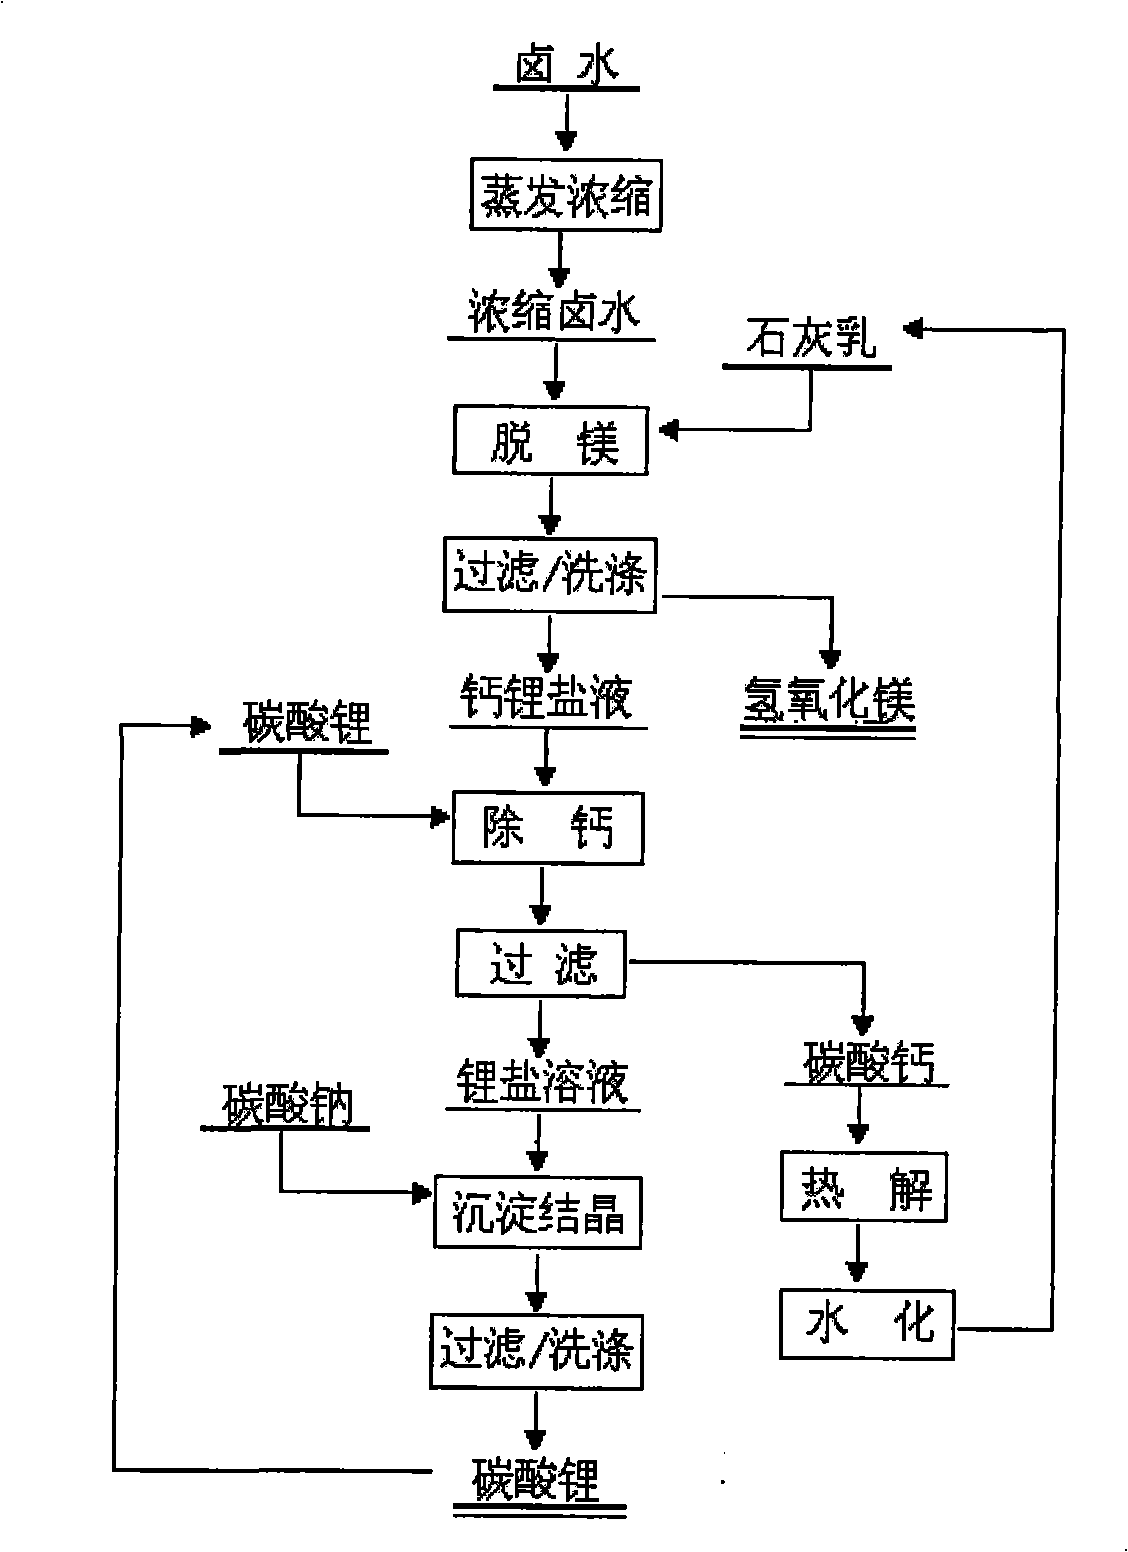 Method for extracting lithium salt from salt lake bittern with low-magnesium-lithium ratio with calcium circulation solid phase conversion method